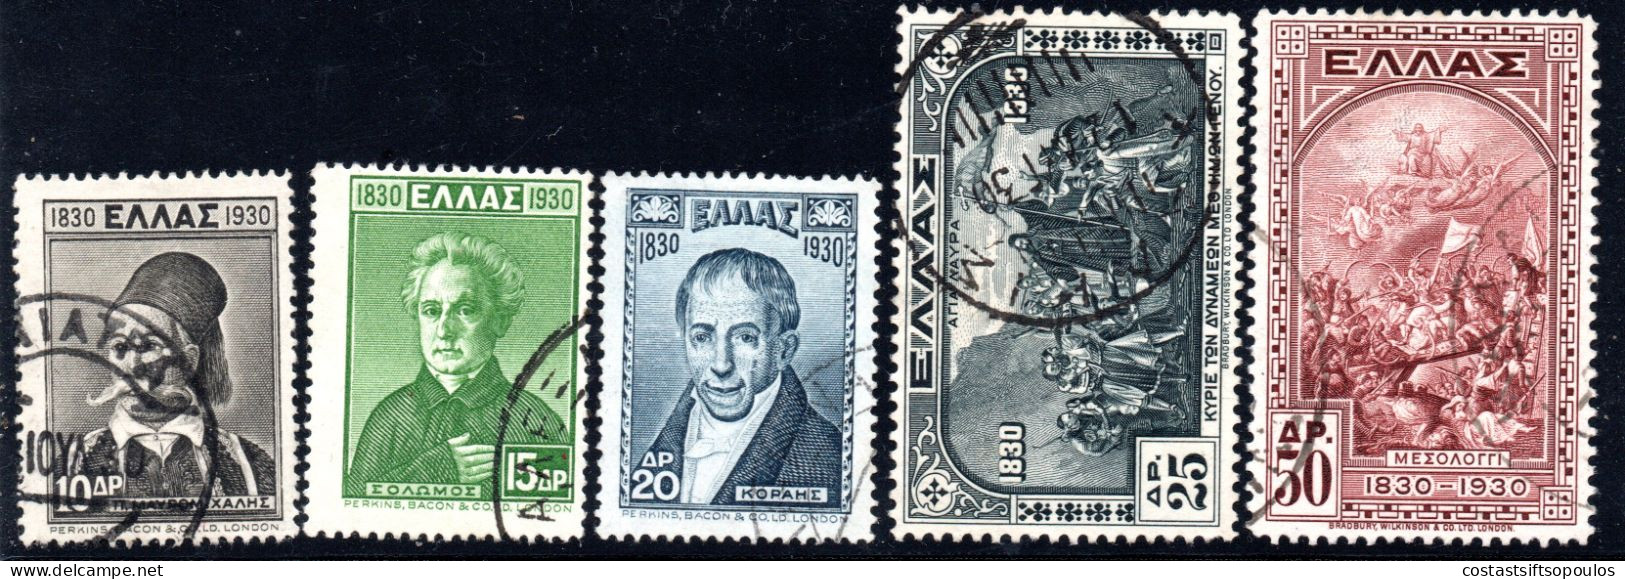 2954. GREECE.1930 INDEPENDENCE(HEROES) HIGH VALUES 10 DR-50 DR.HELLAS 504-508. - Used Stamps